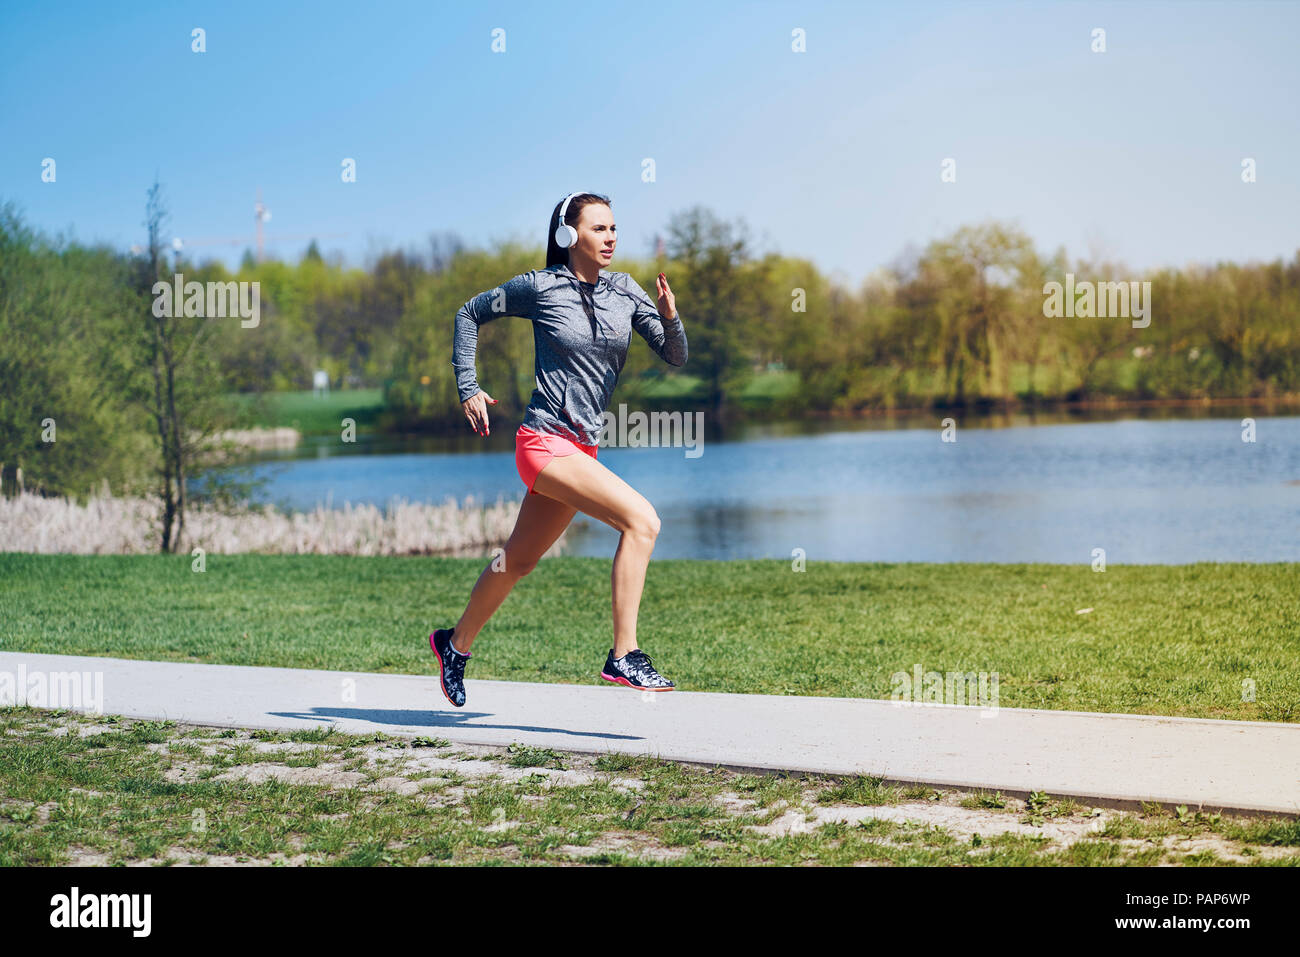 Female jogger running at park Banque D'Images